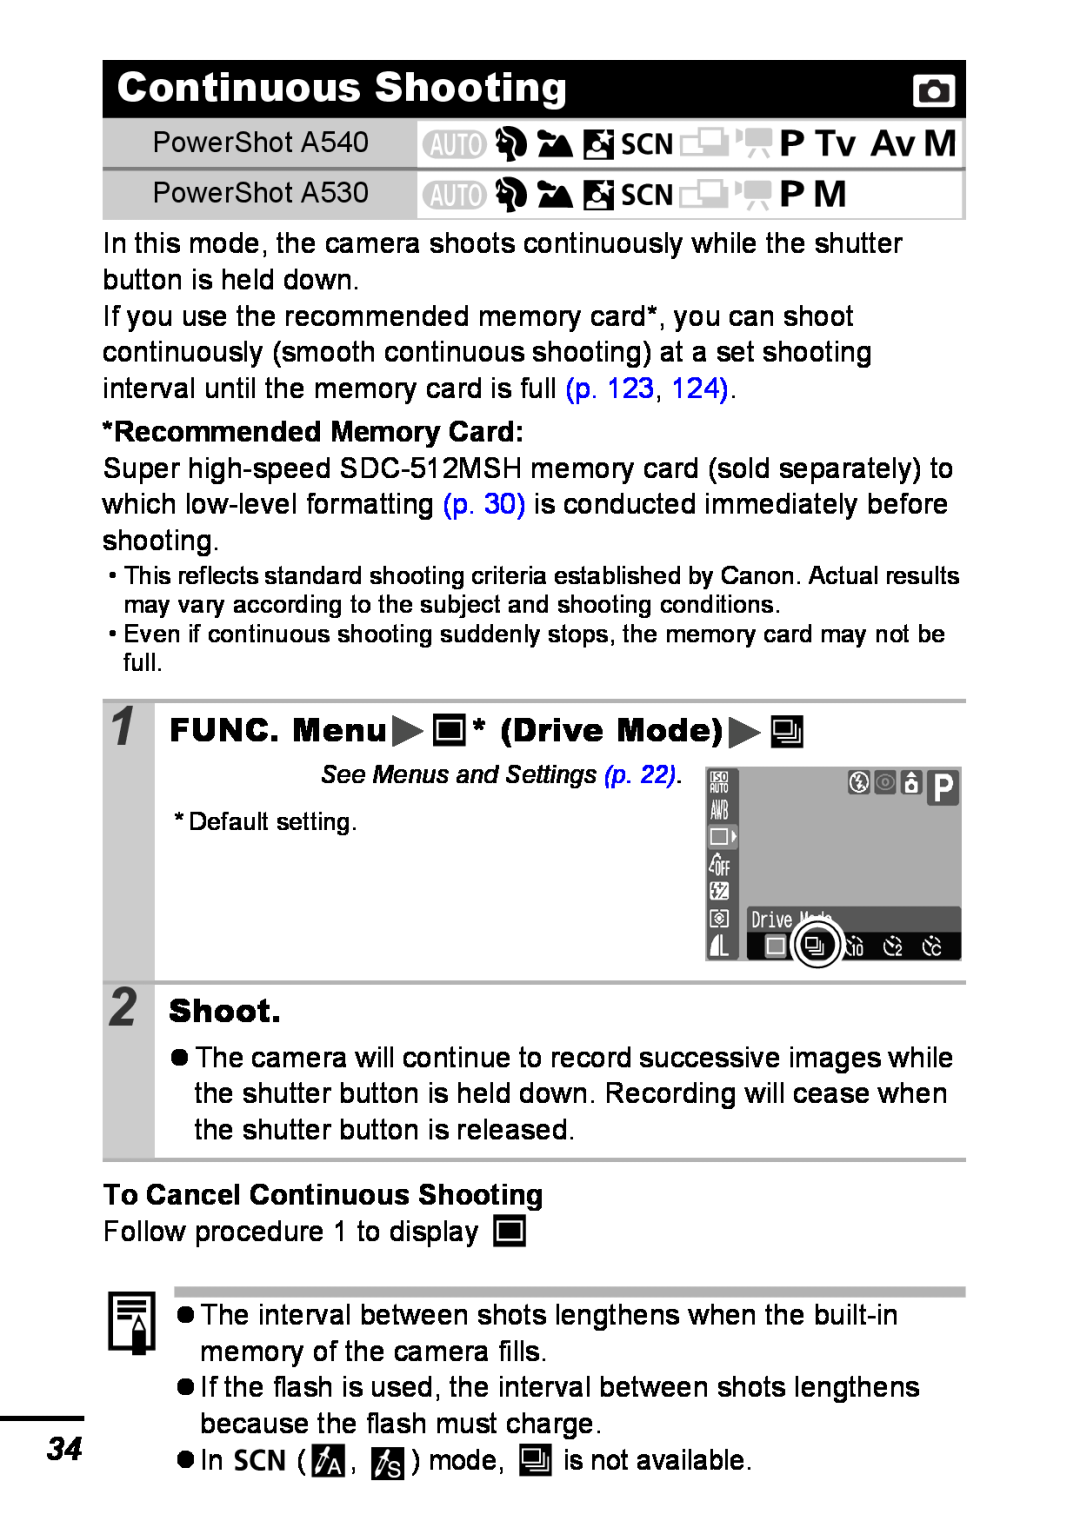 Canon A540 appendix FUNC. Menu * Drive Mode, Recommended Memory Card, To Cancel Continuous Shooting 